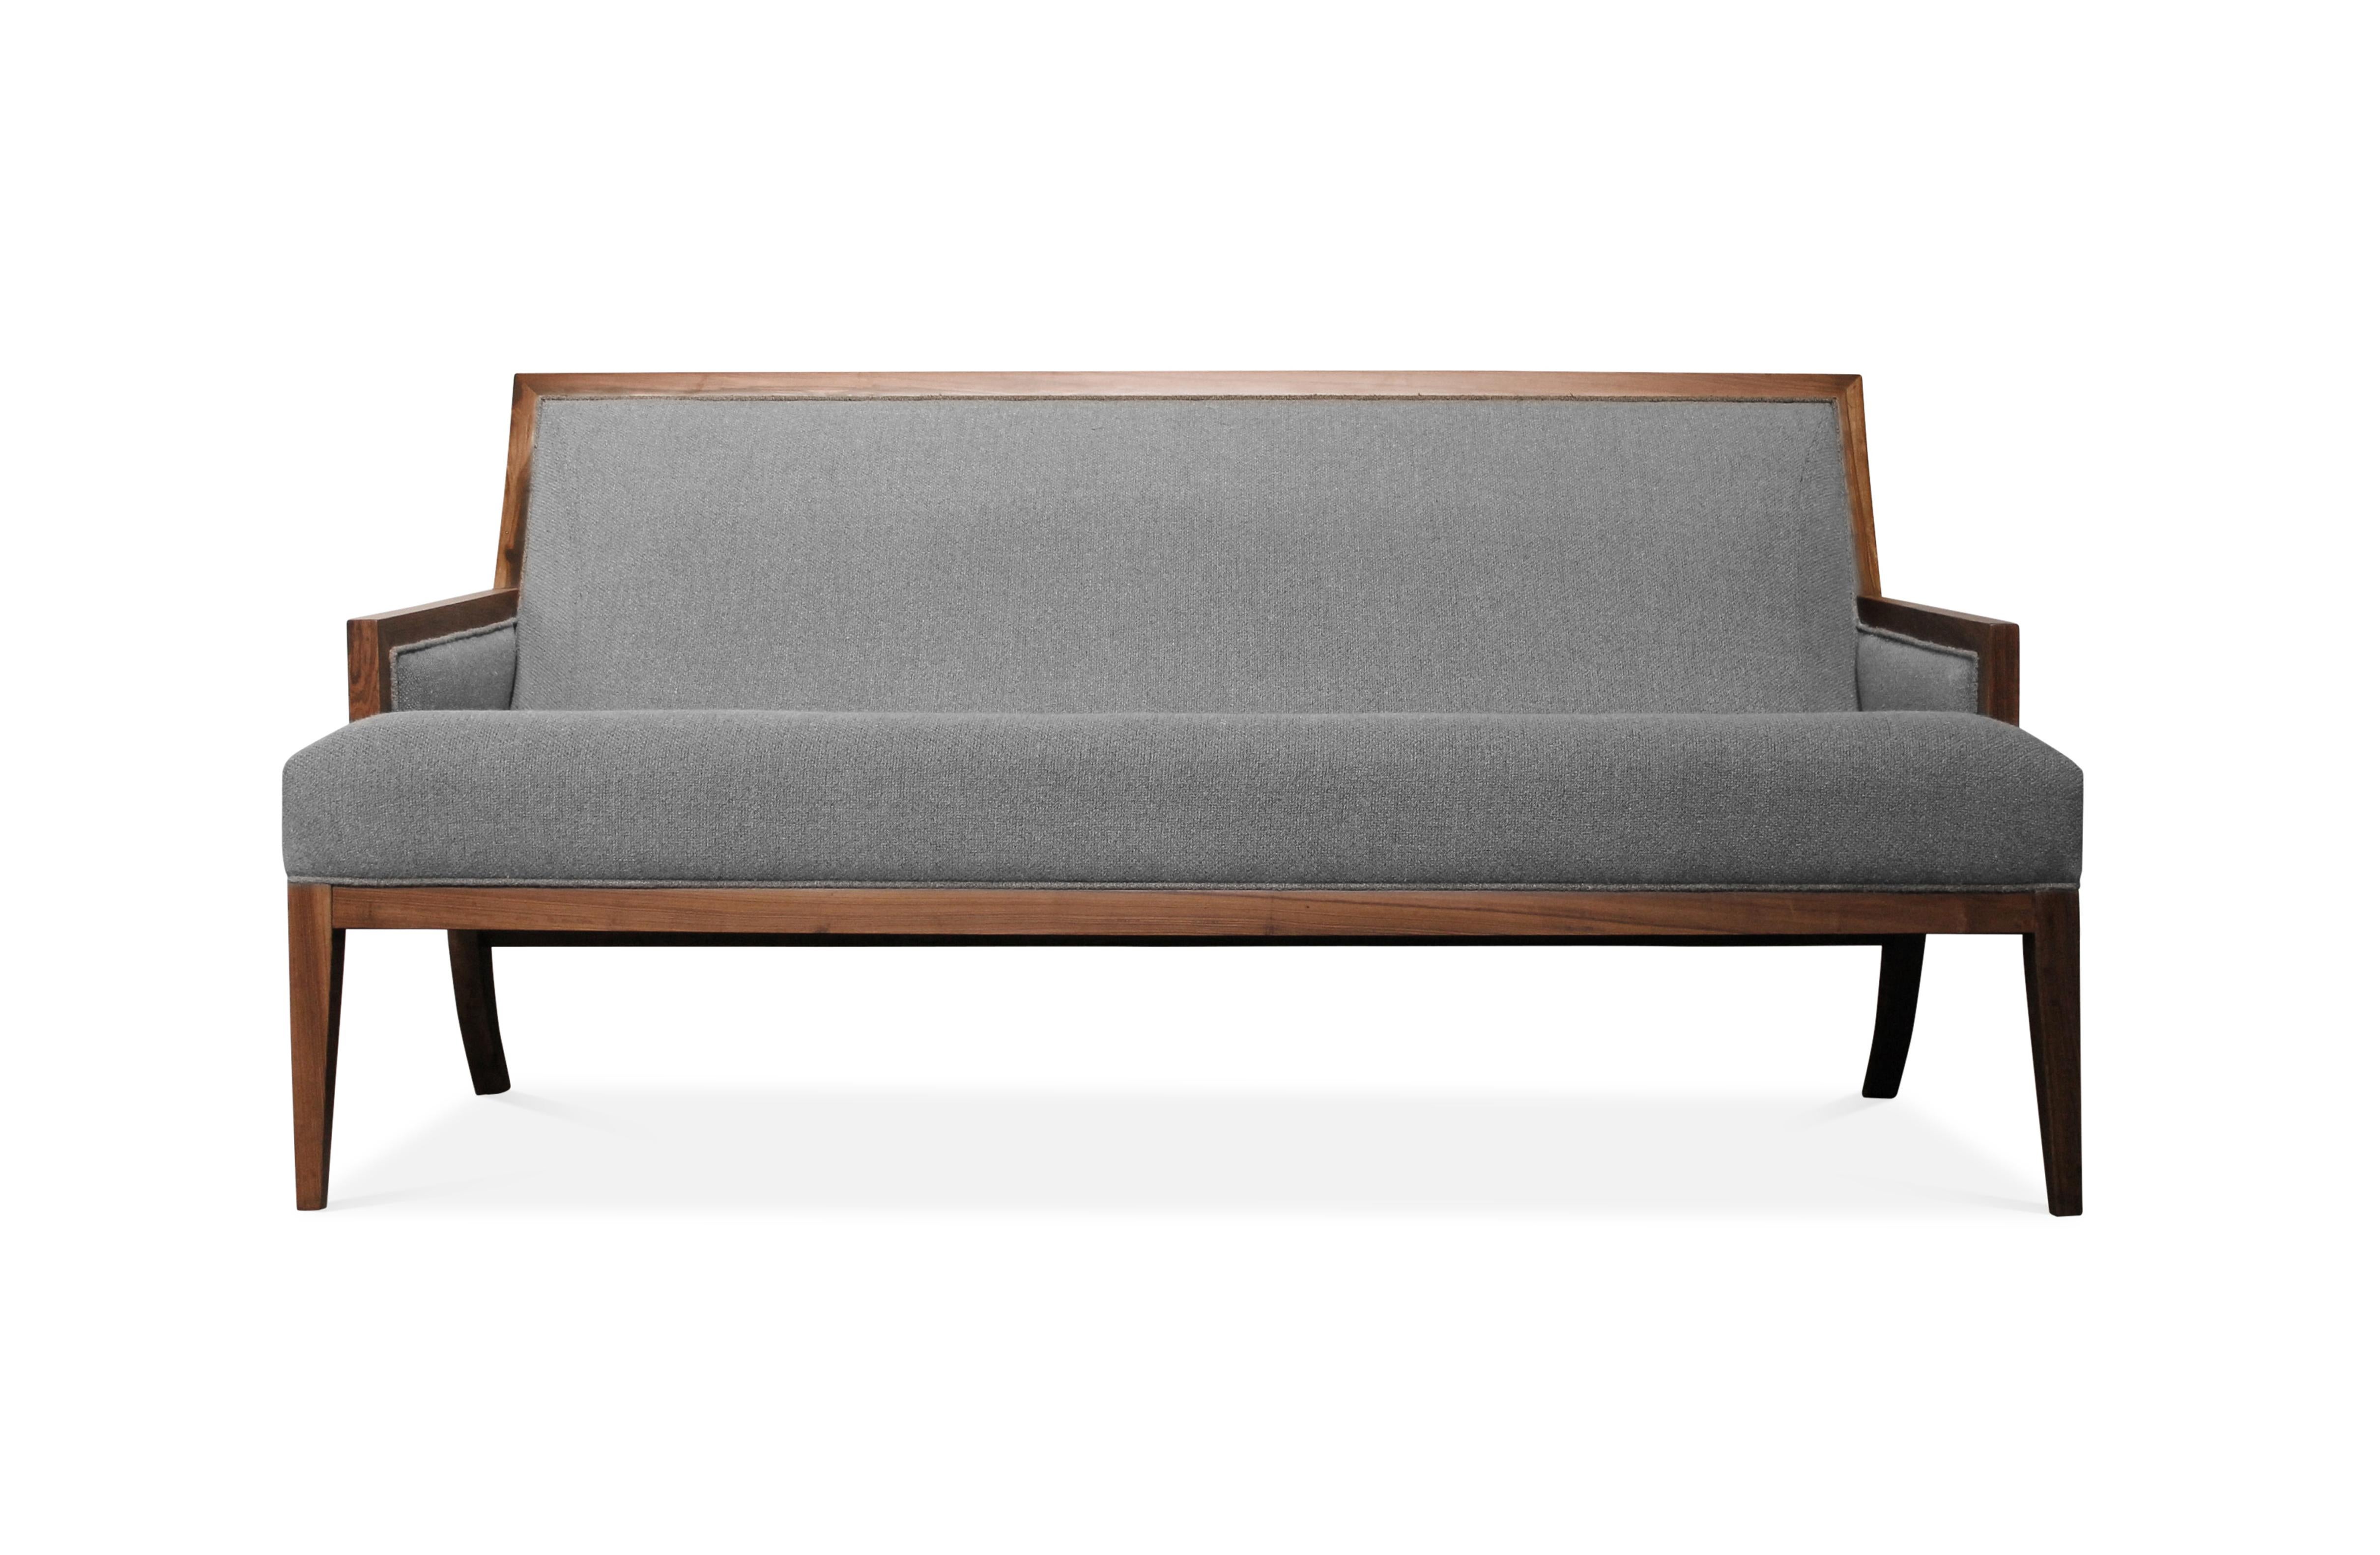 The Belgrano Settee is inspired by mid-twentieth century modernist design and features an ergonomic backrest. It can be customized into any size. Shown in Argentine Rosewood and C.O.L. but available in any finish or upholstery